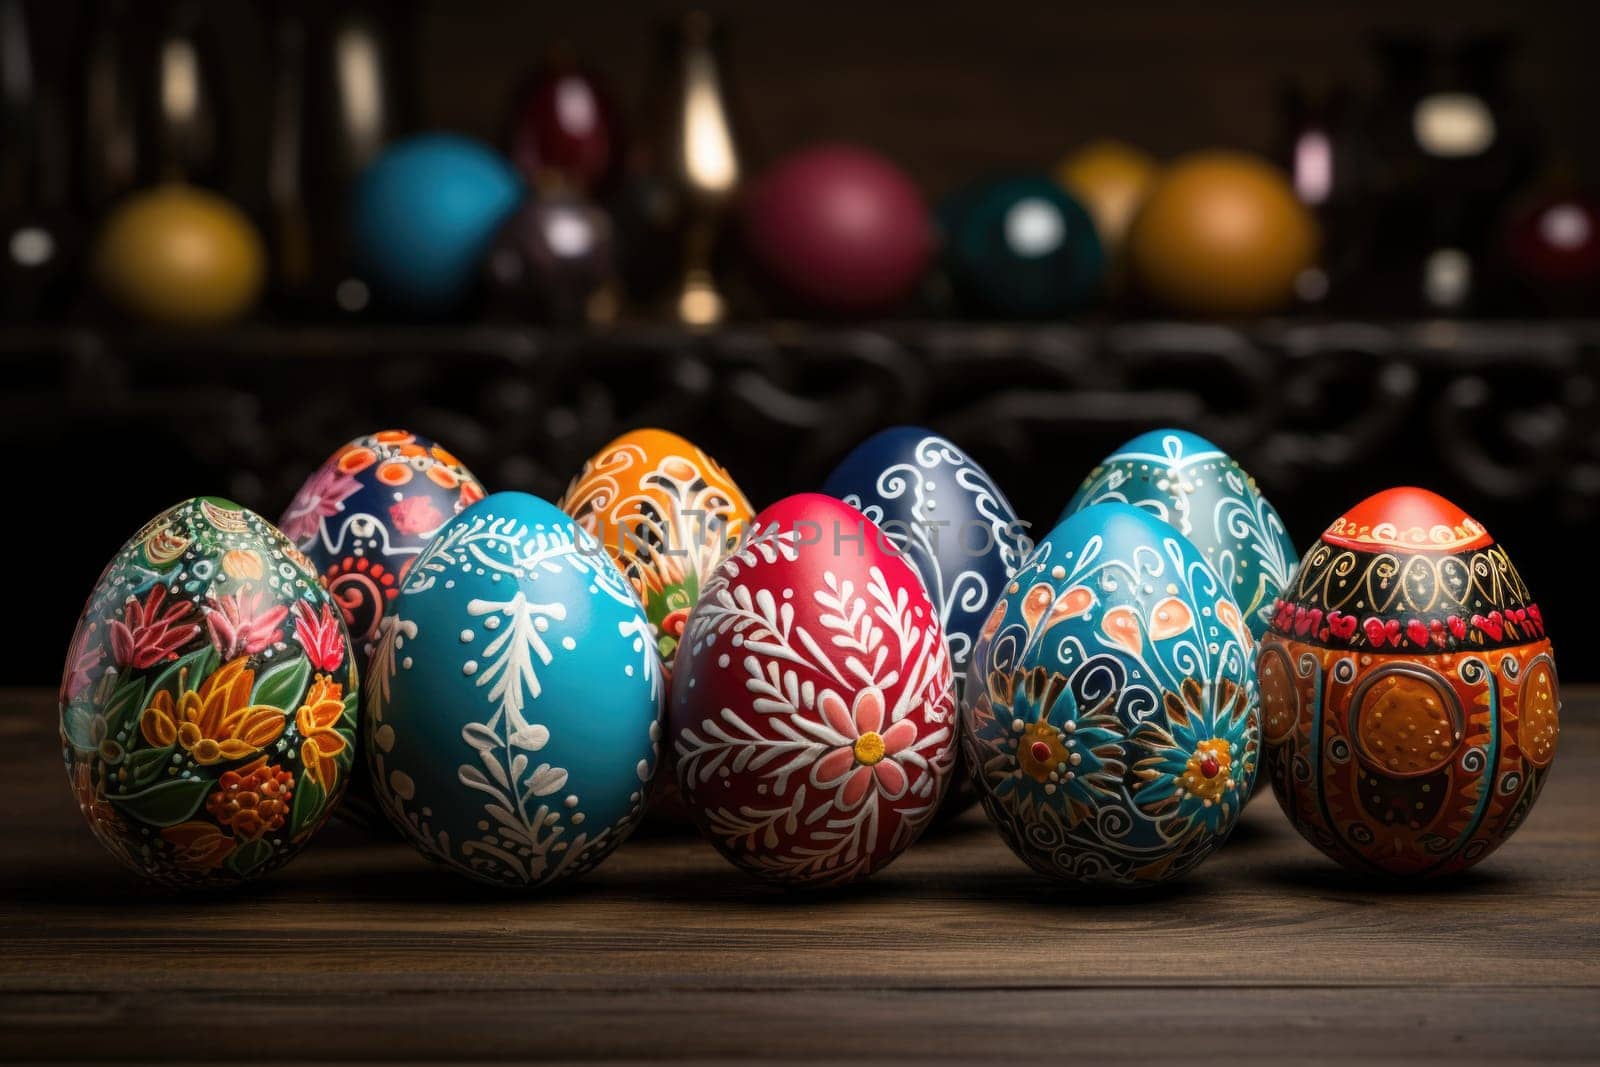 Row of Painted Eggs on Wooden Table by but_photo